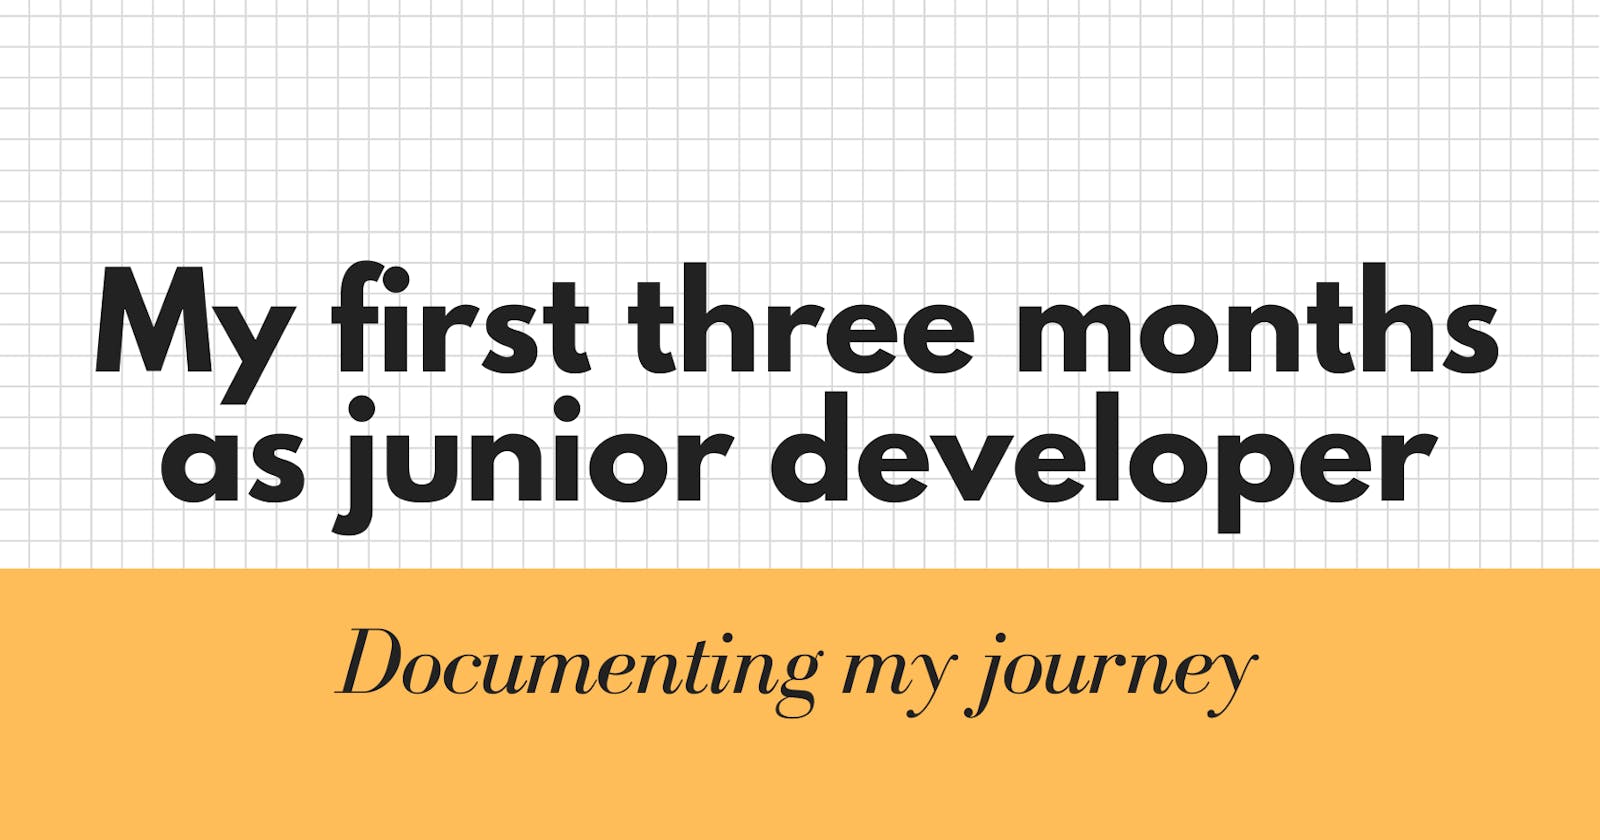 Learning on the job. Documenting my first three months as a junior software developer.